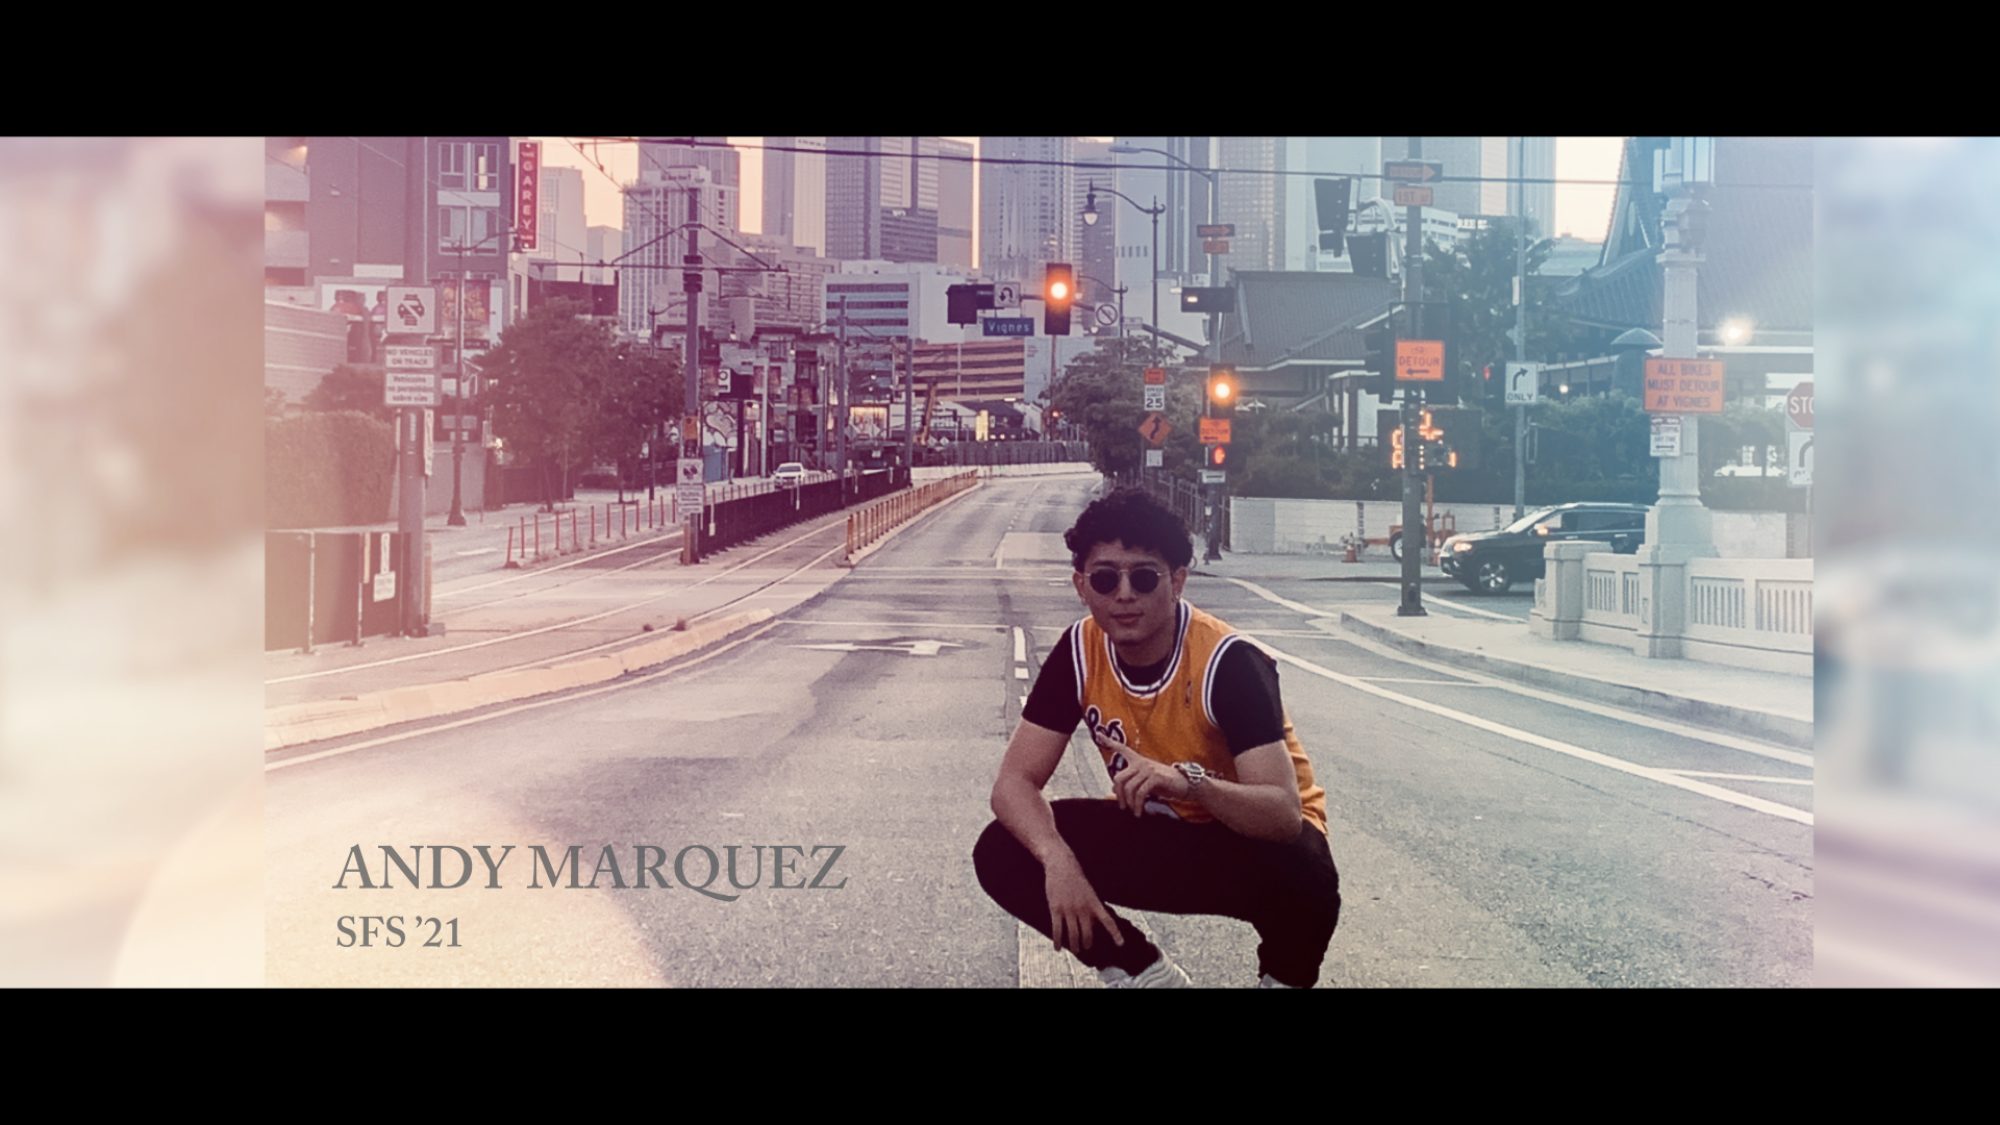 Andy Marquez in Los Angeles